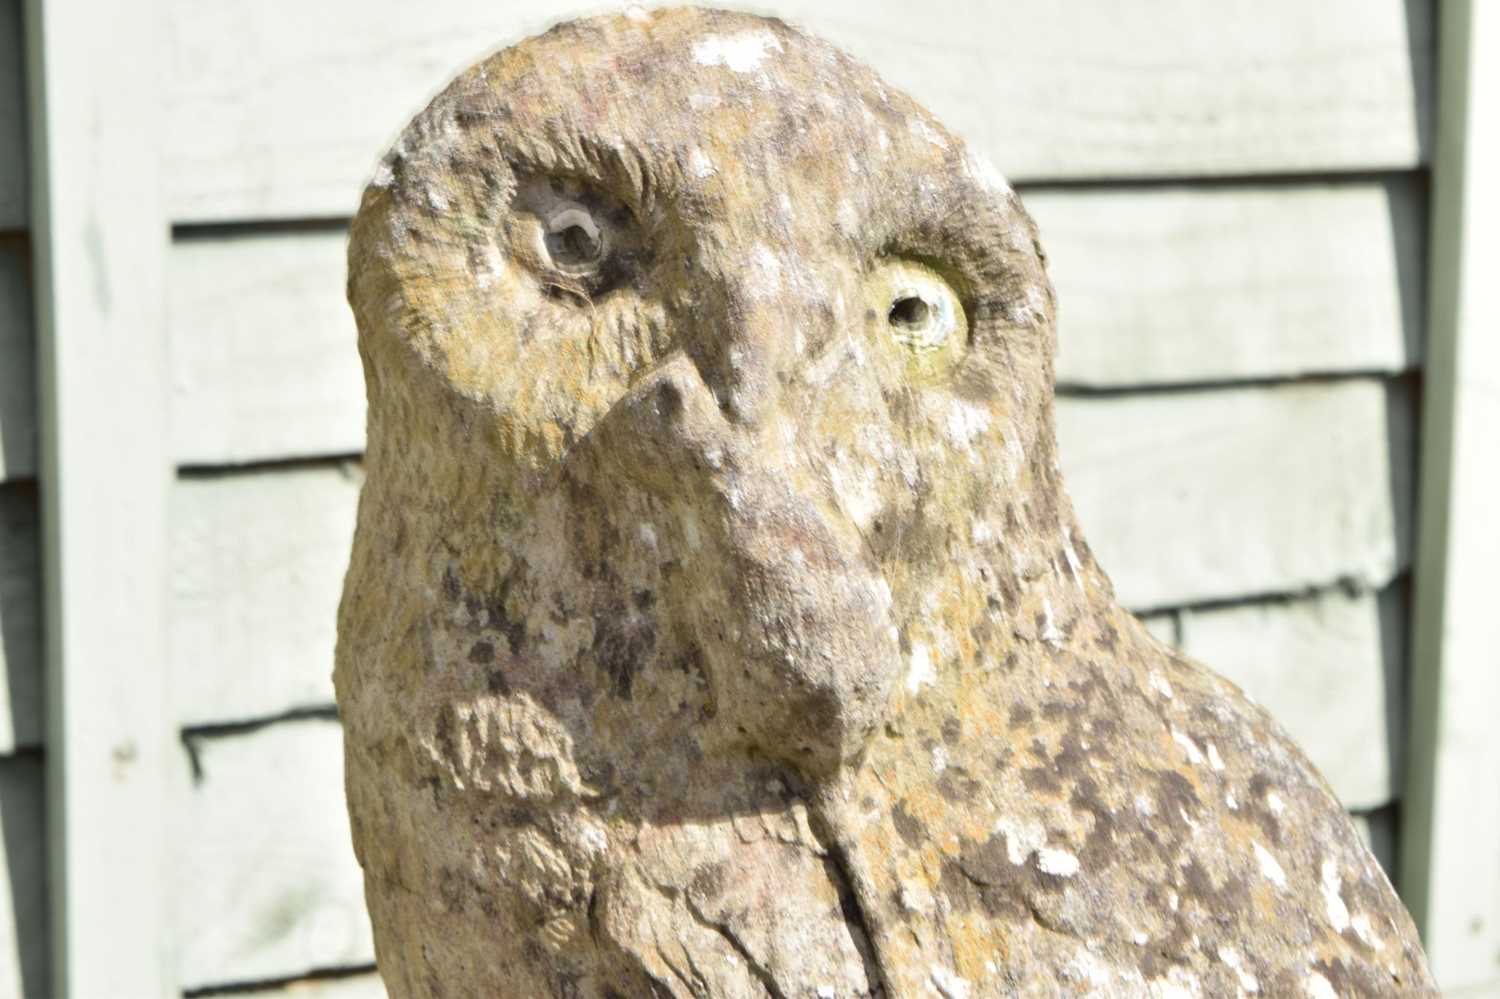 Composition stone garden ornament of a perched owl - Image 3 of 4